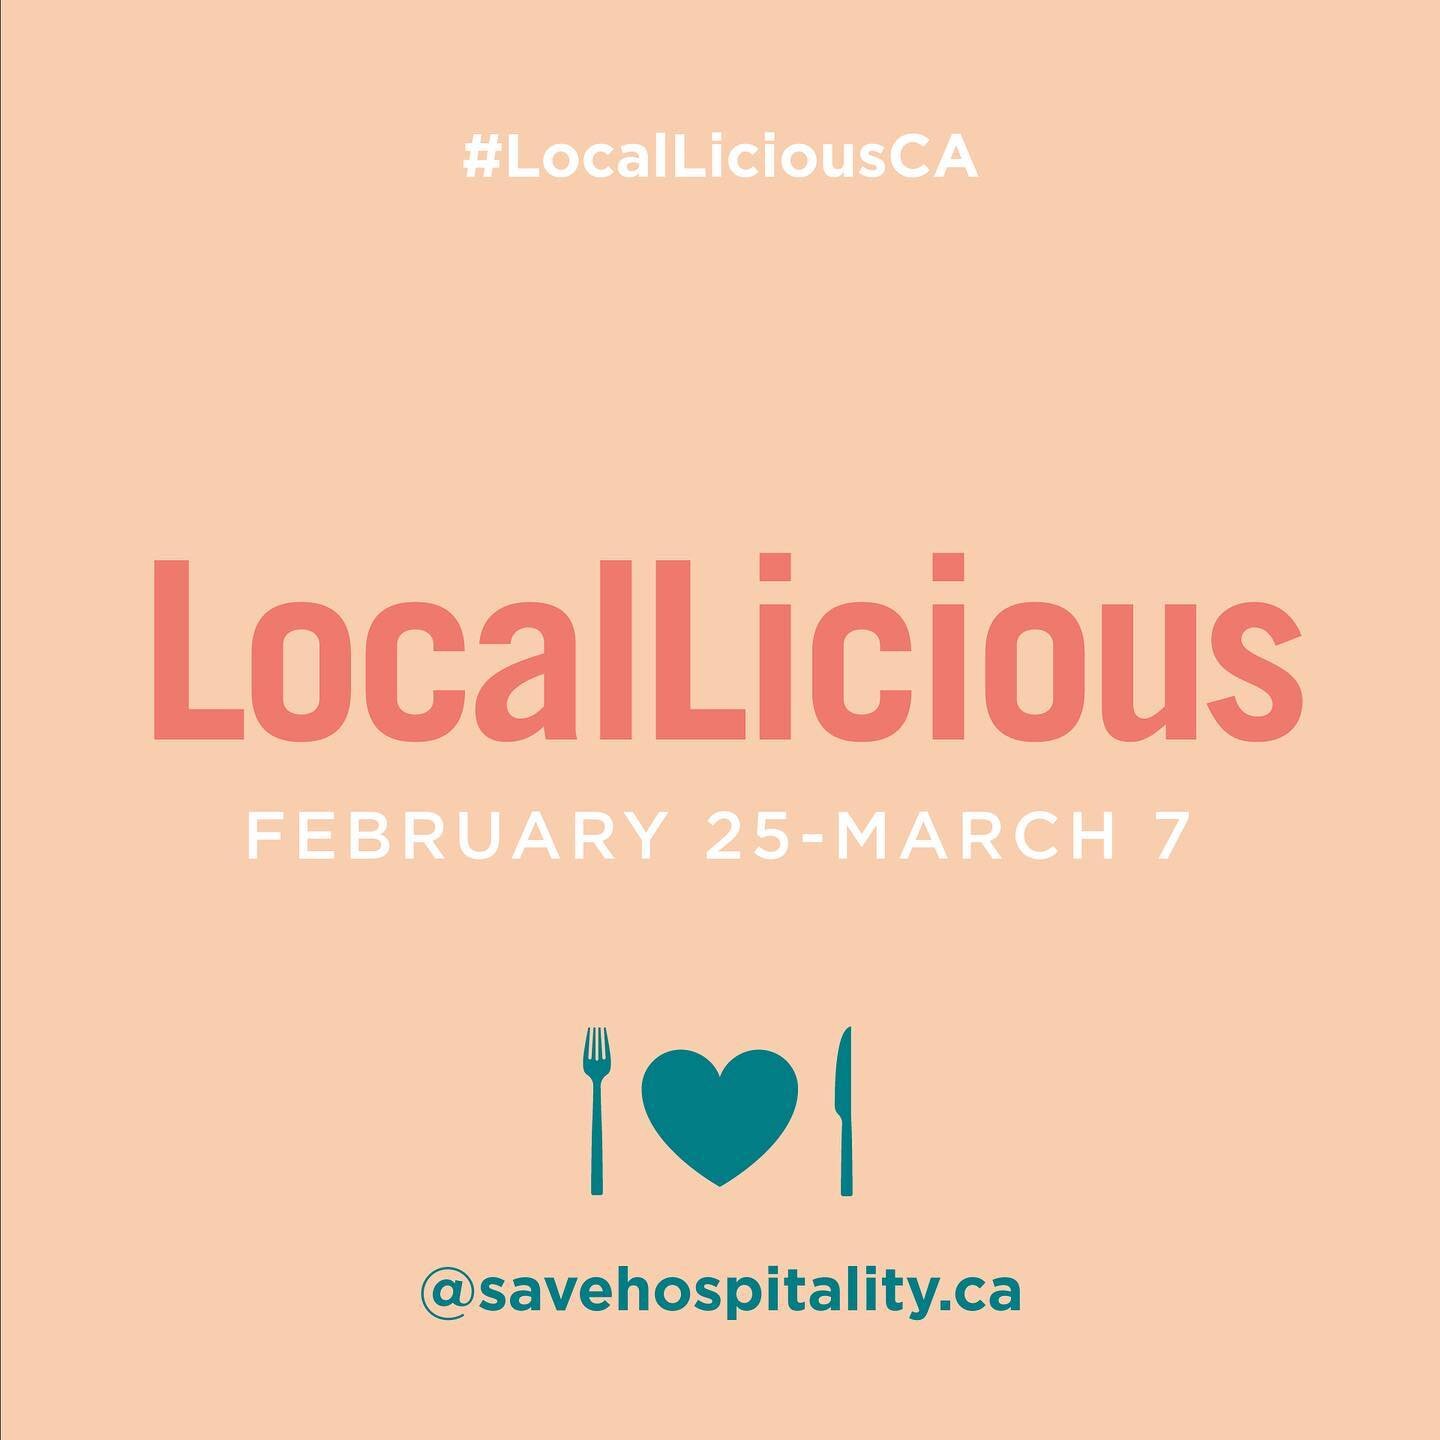 We are proud to be participating in #LocalLiciousCA, a @savehospitalityca initiative to bring restaurants across the country together to encourage people to support local eateries and communities. 

From Feb 25-Mar 7, we, along with other participati